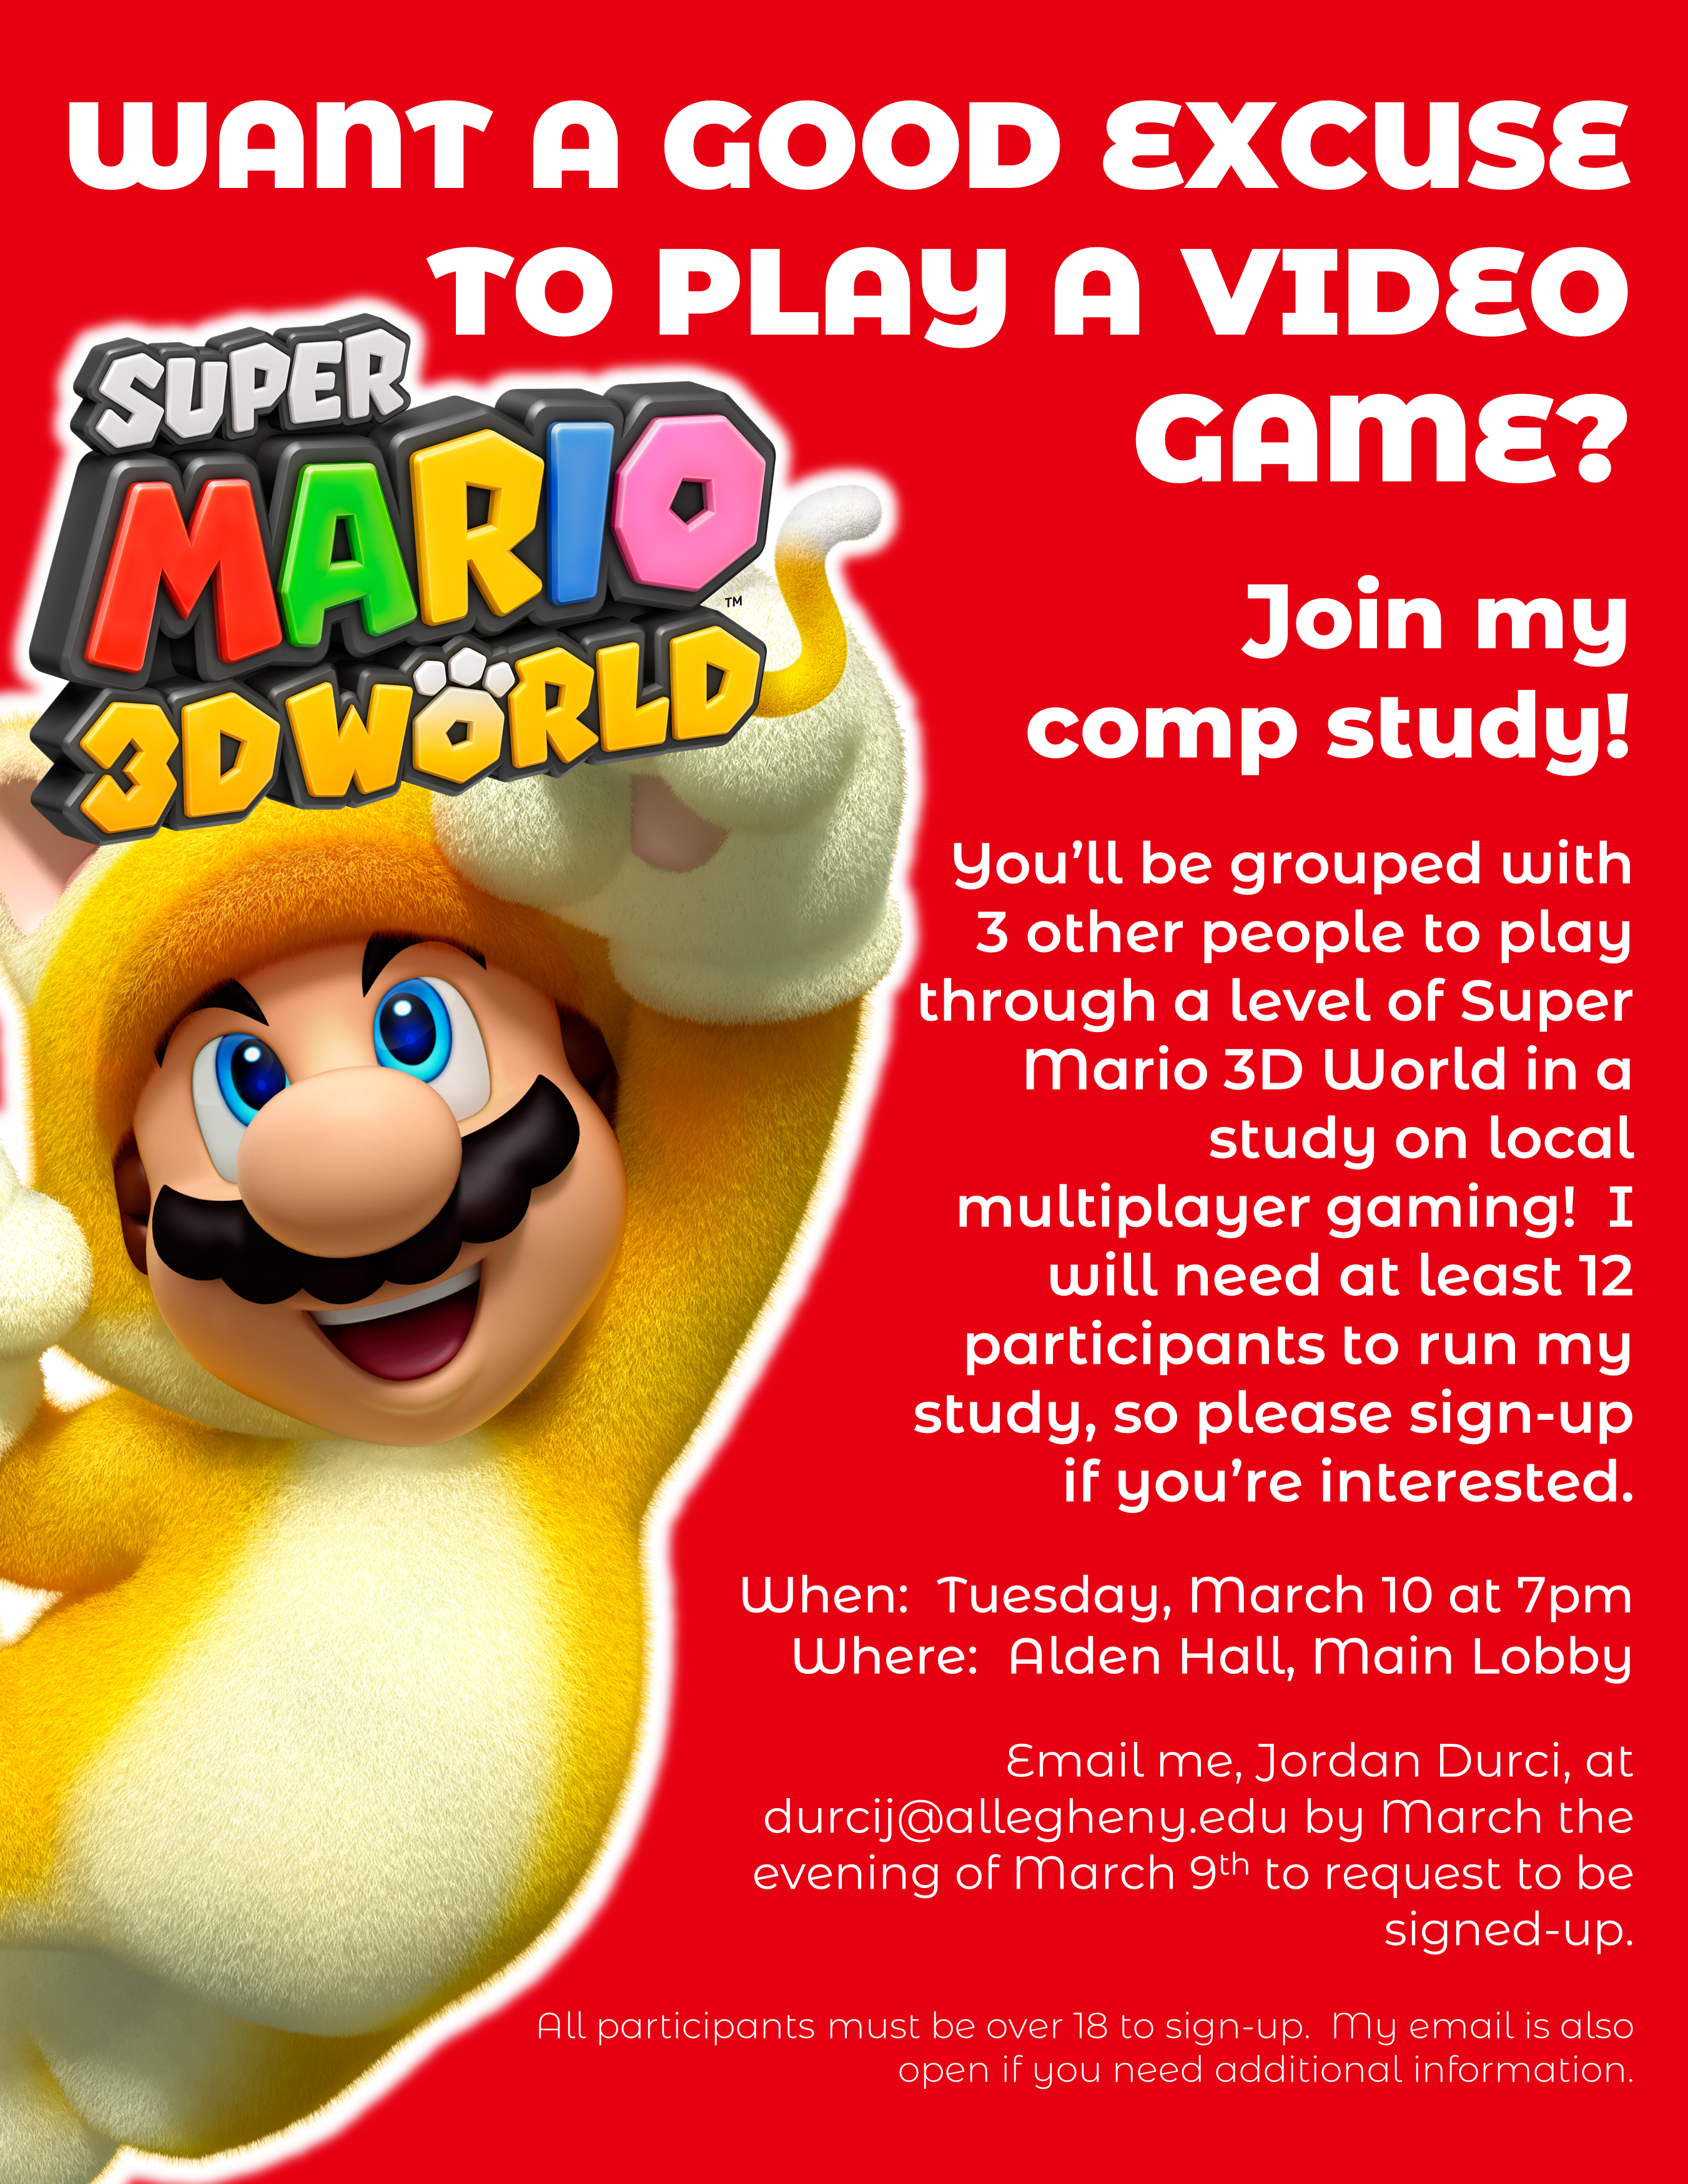 A poster with the Cat Mario render from Super Mario 3D World alongside a request for people to sign up for a study and the eyecatch:  Want a good excuse to play a video game?